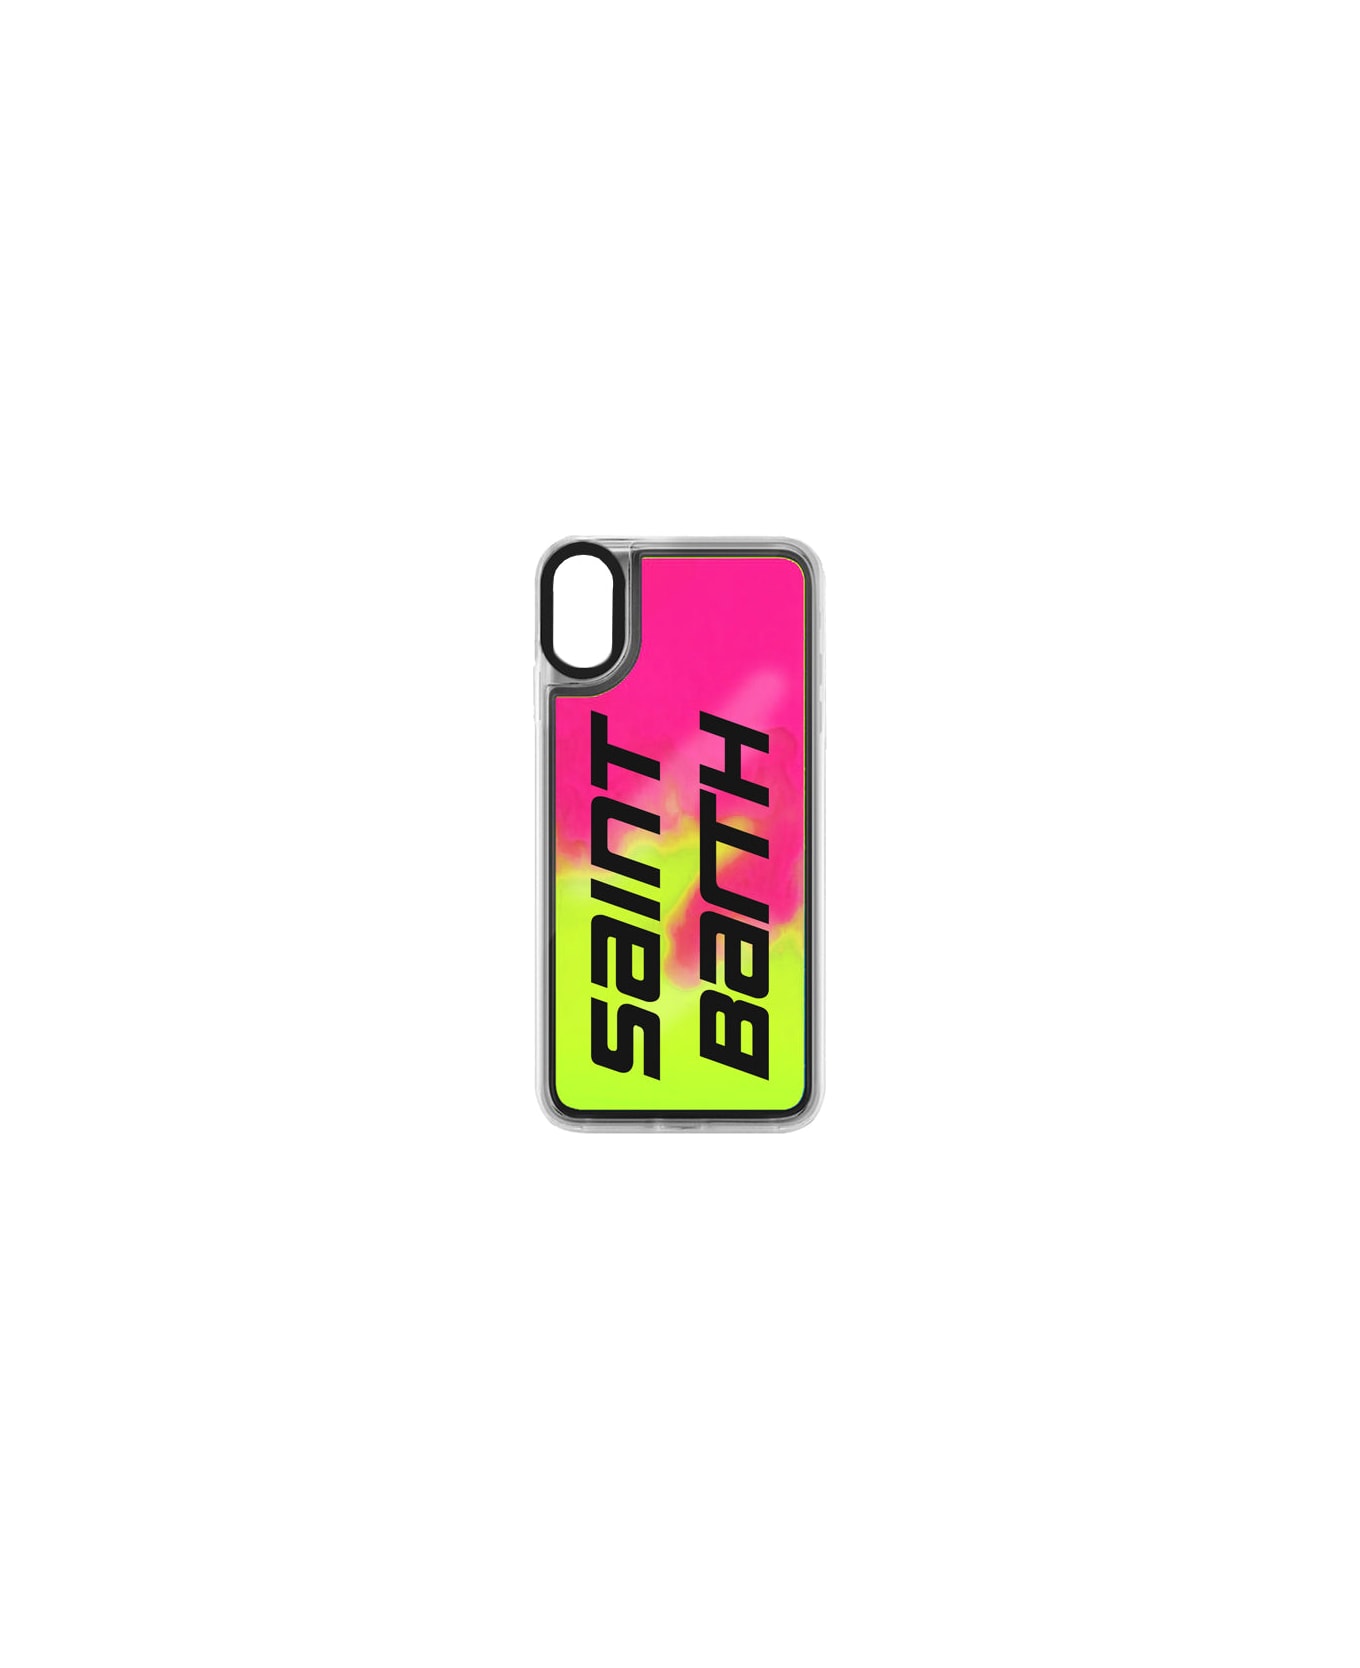 MC2 Saint Barth Pink And Yellow Fluo Degradè Cover For Iphone X And Xs - YELLOW